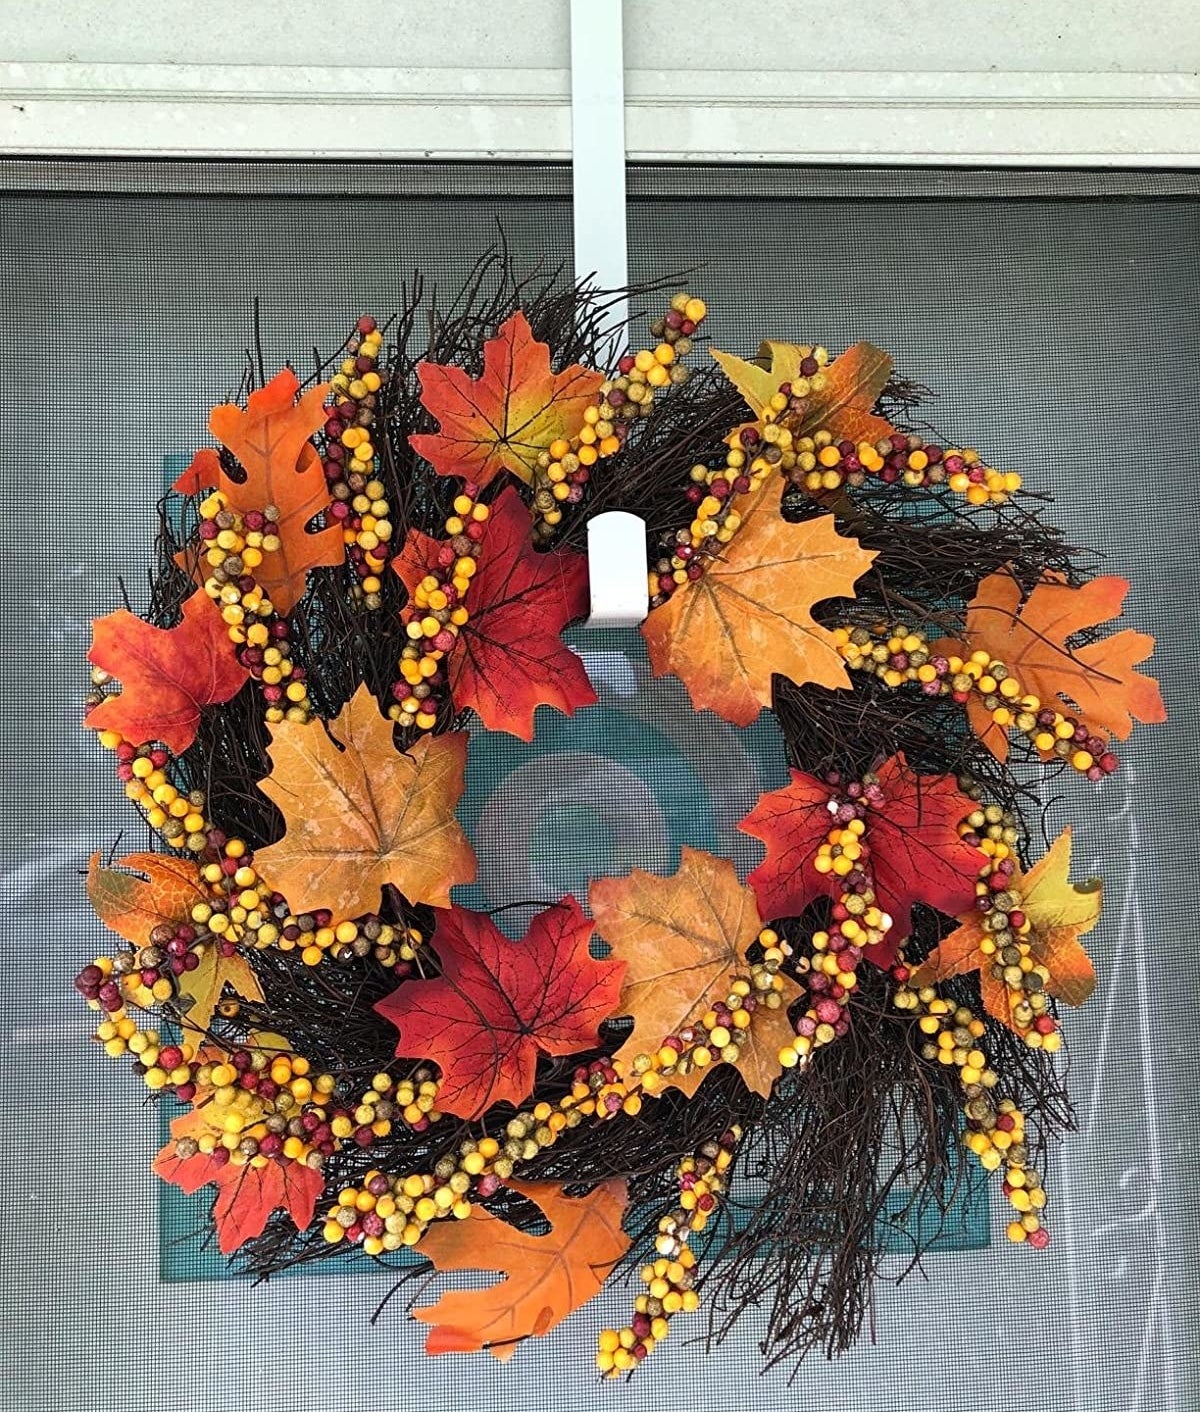 The wreath is full of colorful artificial maple leaves and berries and brown sticks 